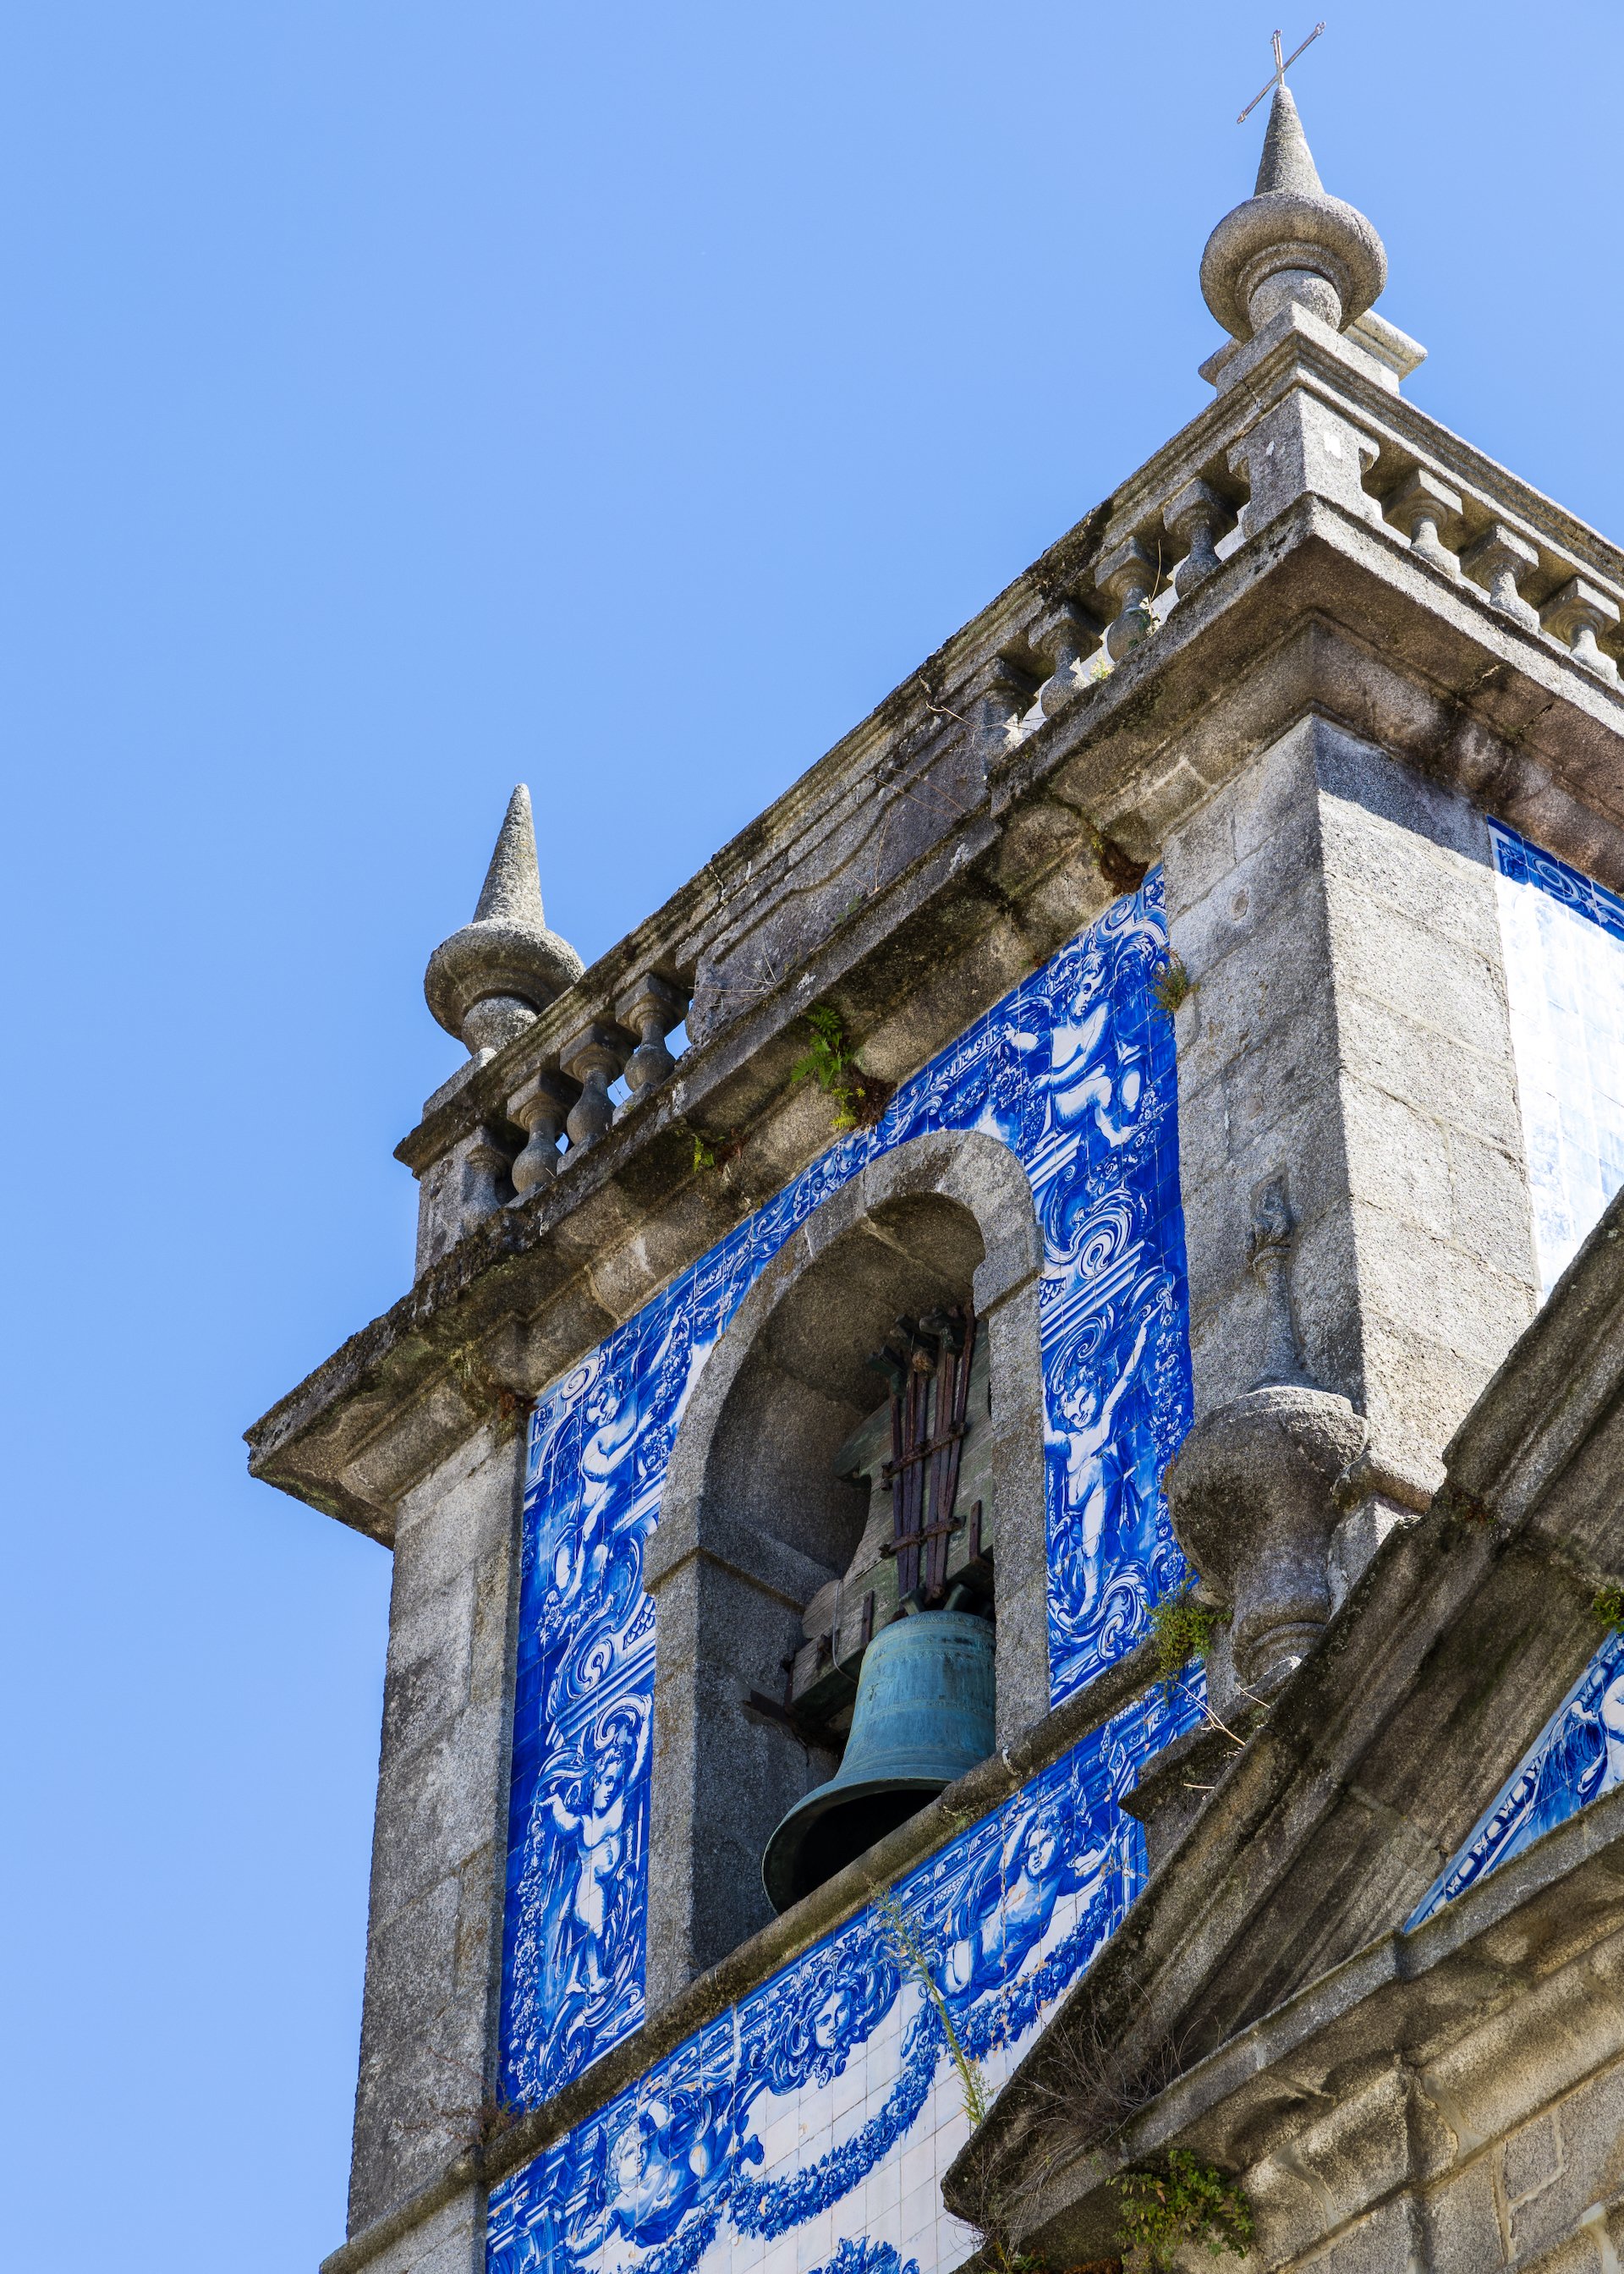  So many of the structures incorporate the traditional blue tile. 